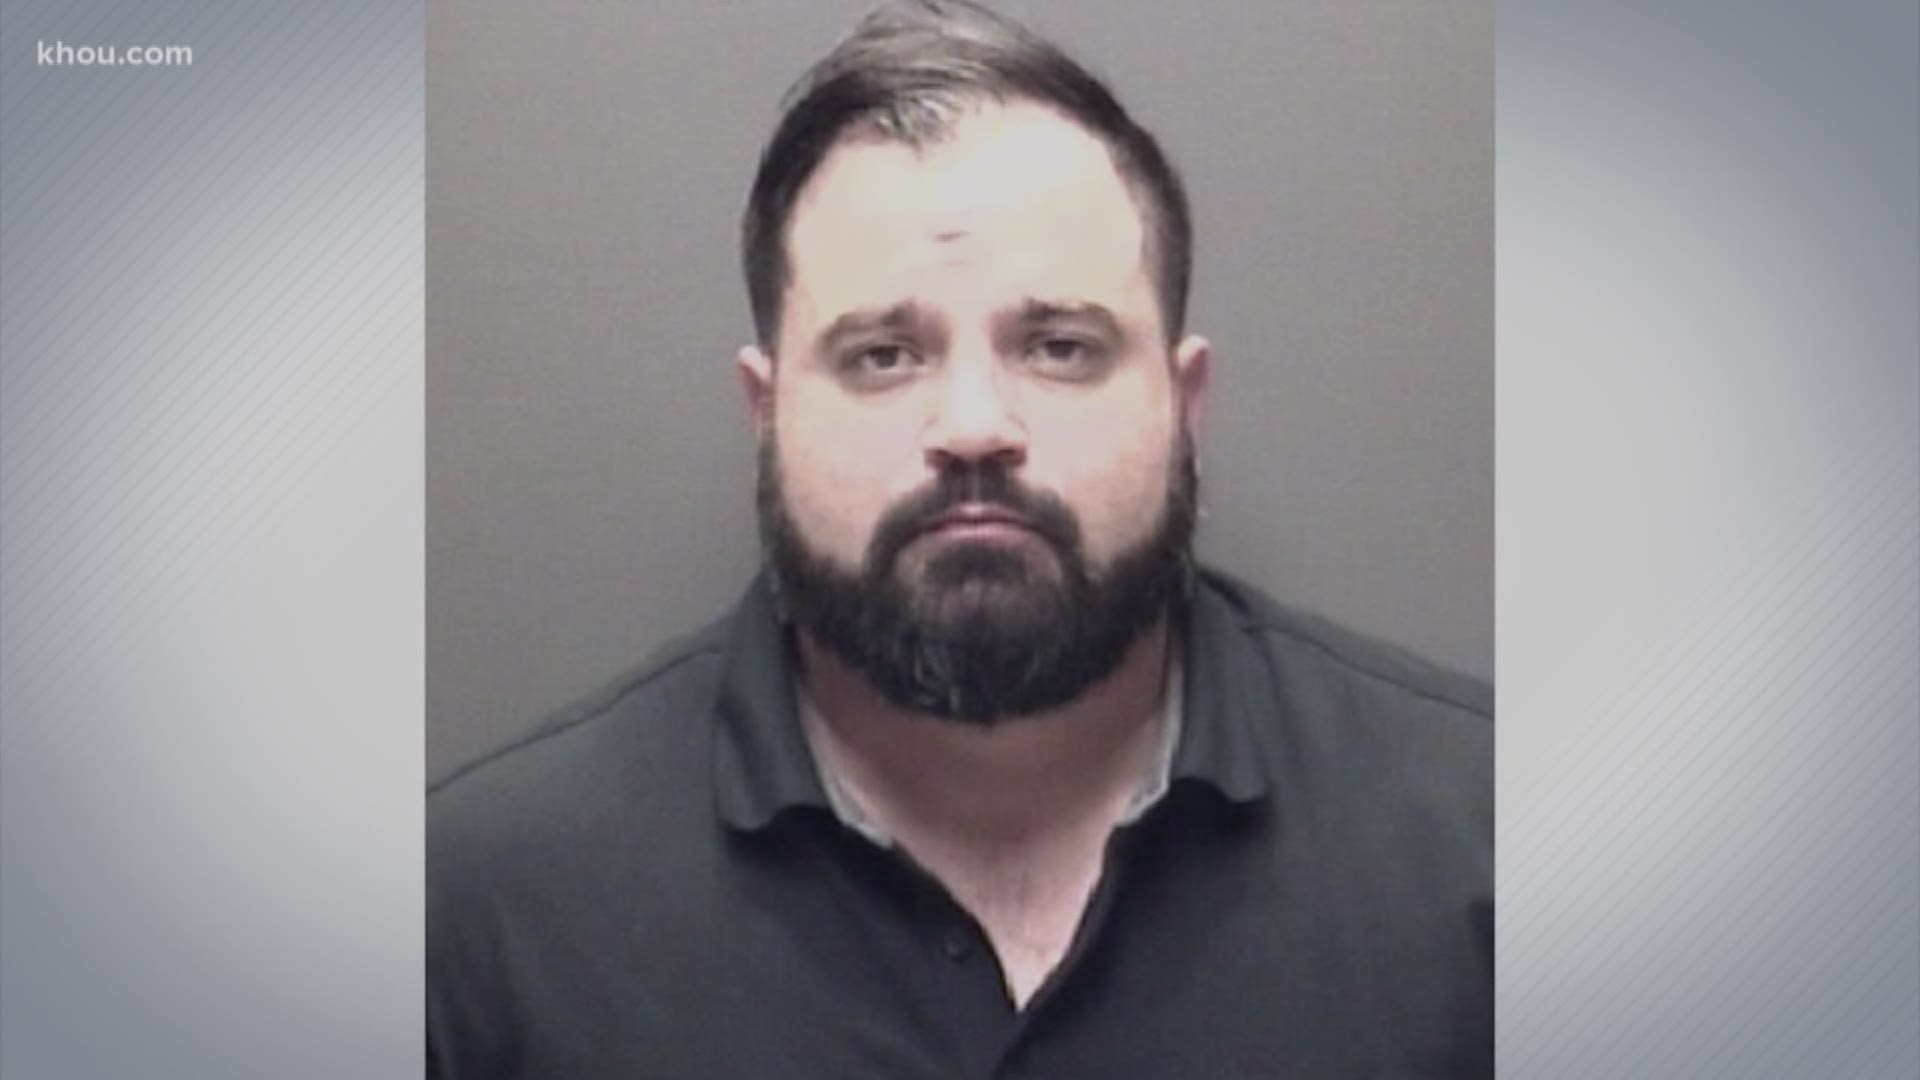 A Galveston police officer was arrested Friday on a domestic violence charge. A grand jury indicted Sgt. Justin Popovich for violence against his family.